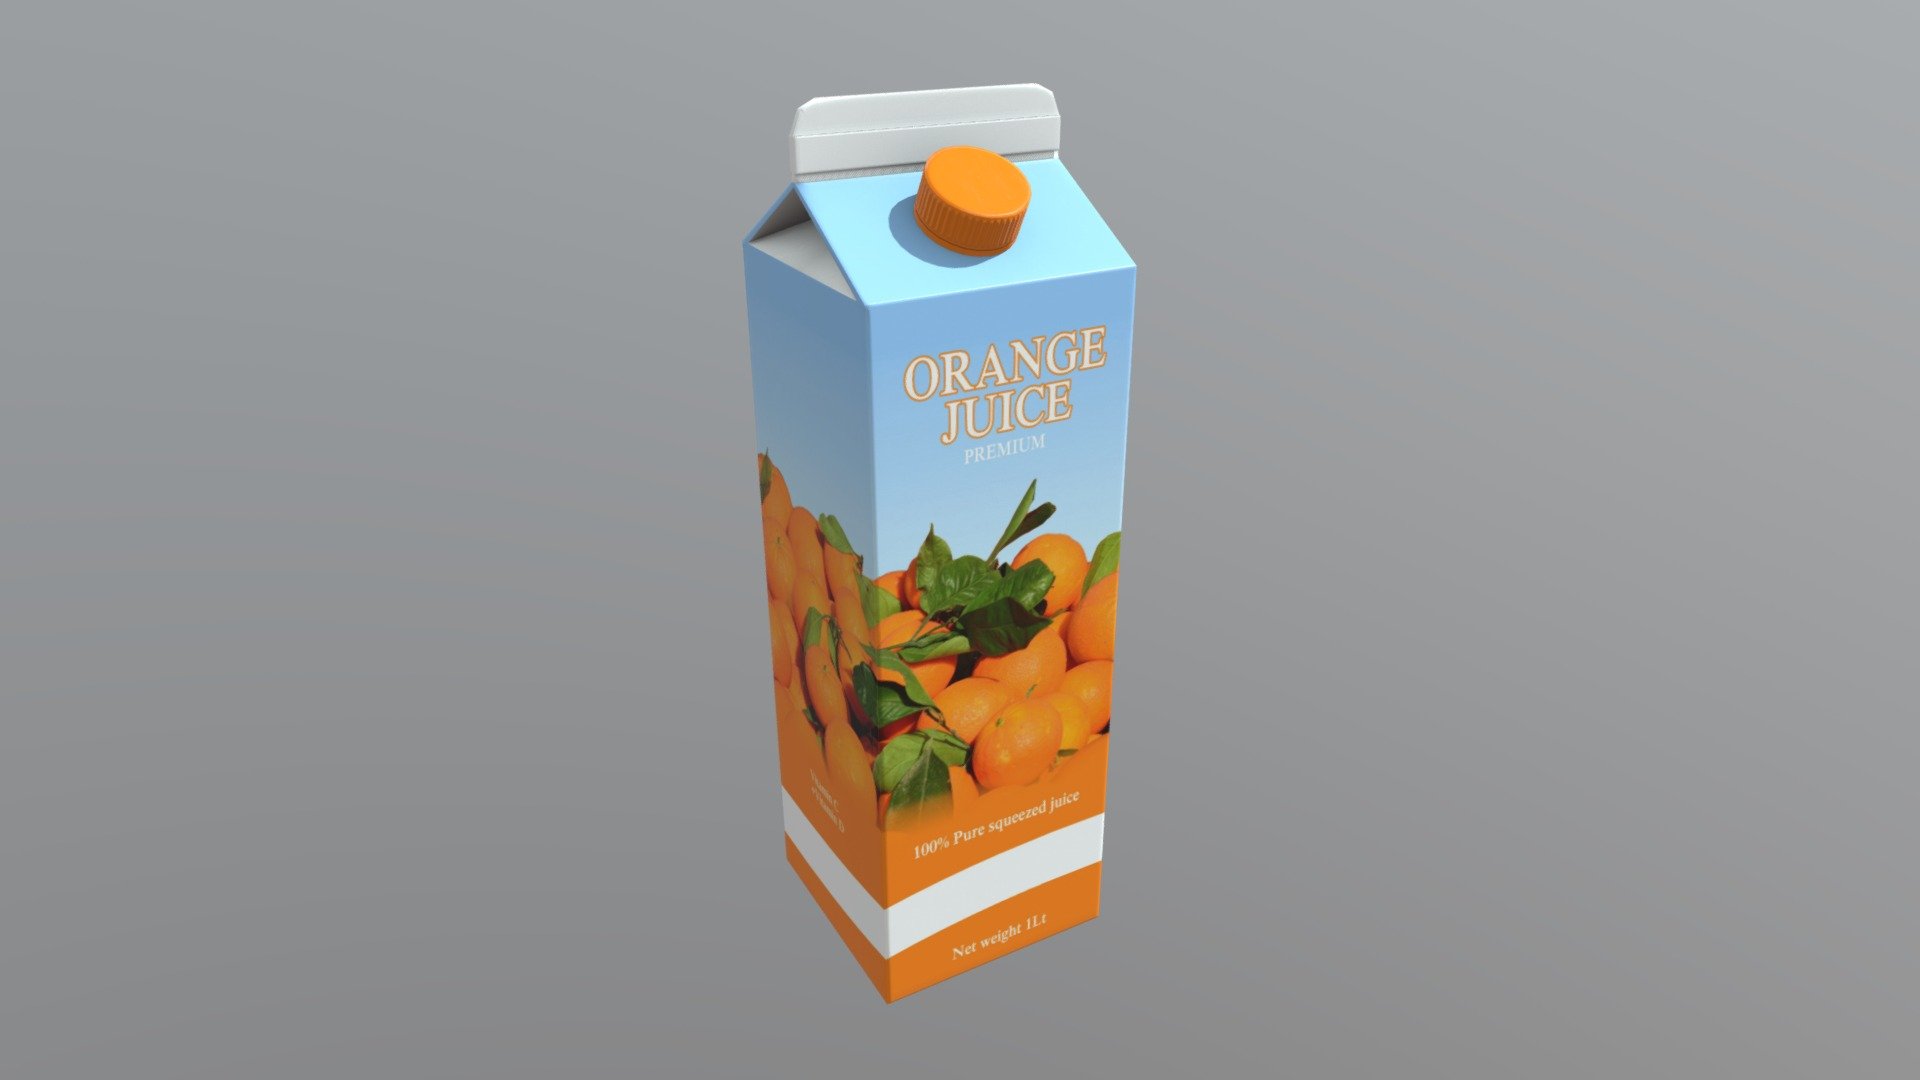 &lsquo;Squeezed and with a plus of Vitamin D, Orange Juice premium!' Includes x2048 PBR textures. The normal map is baked from the high poly model.

If you need help with this model or have a question – please do not hesitate to contact with me. I will be happy to help you.

Contact: plaggy.net@gmail.com - Orange Juice - Buy Royalty Free 3D model by plaggy 3d model